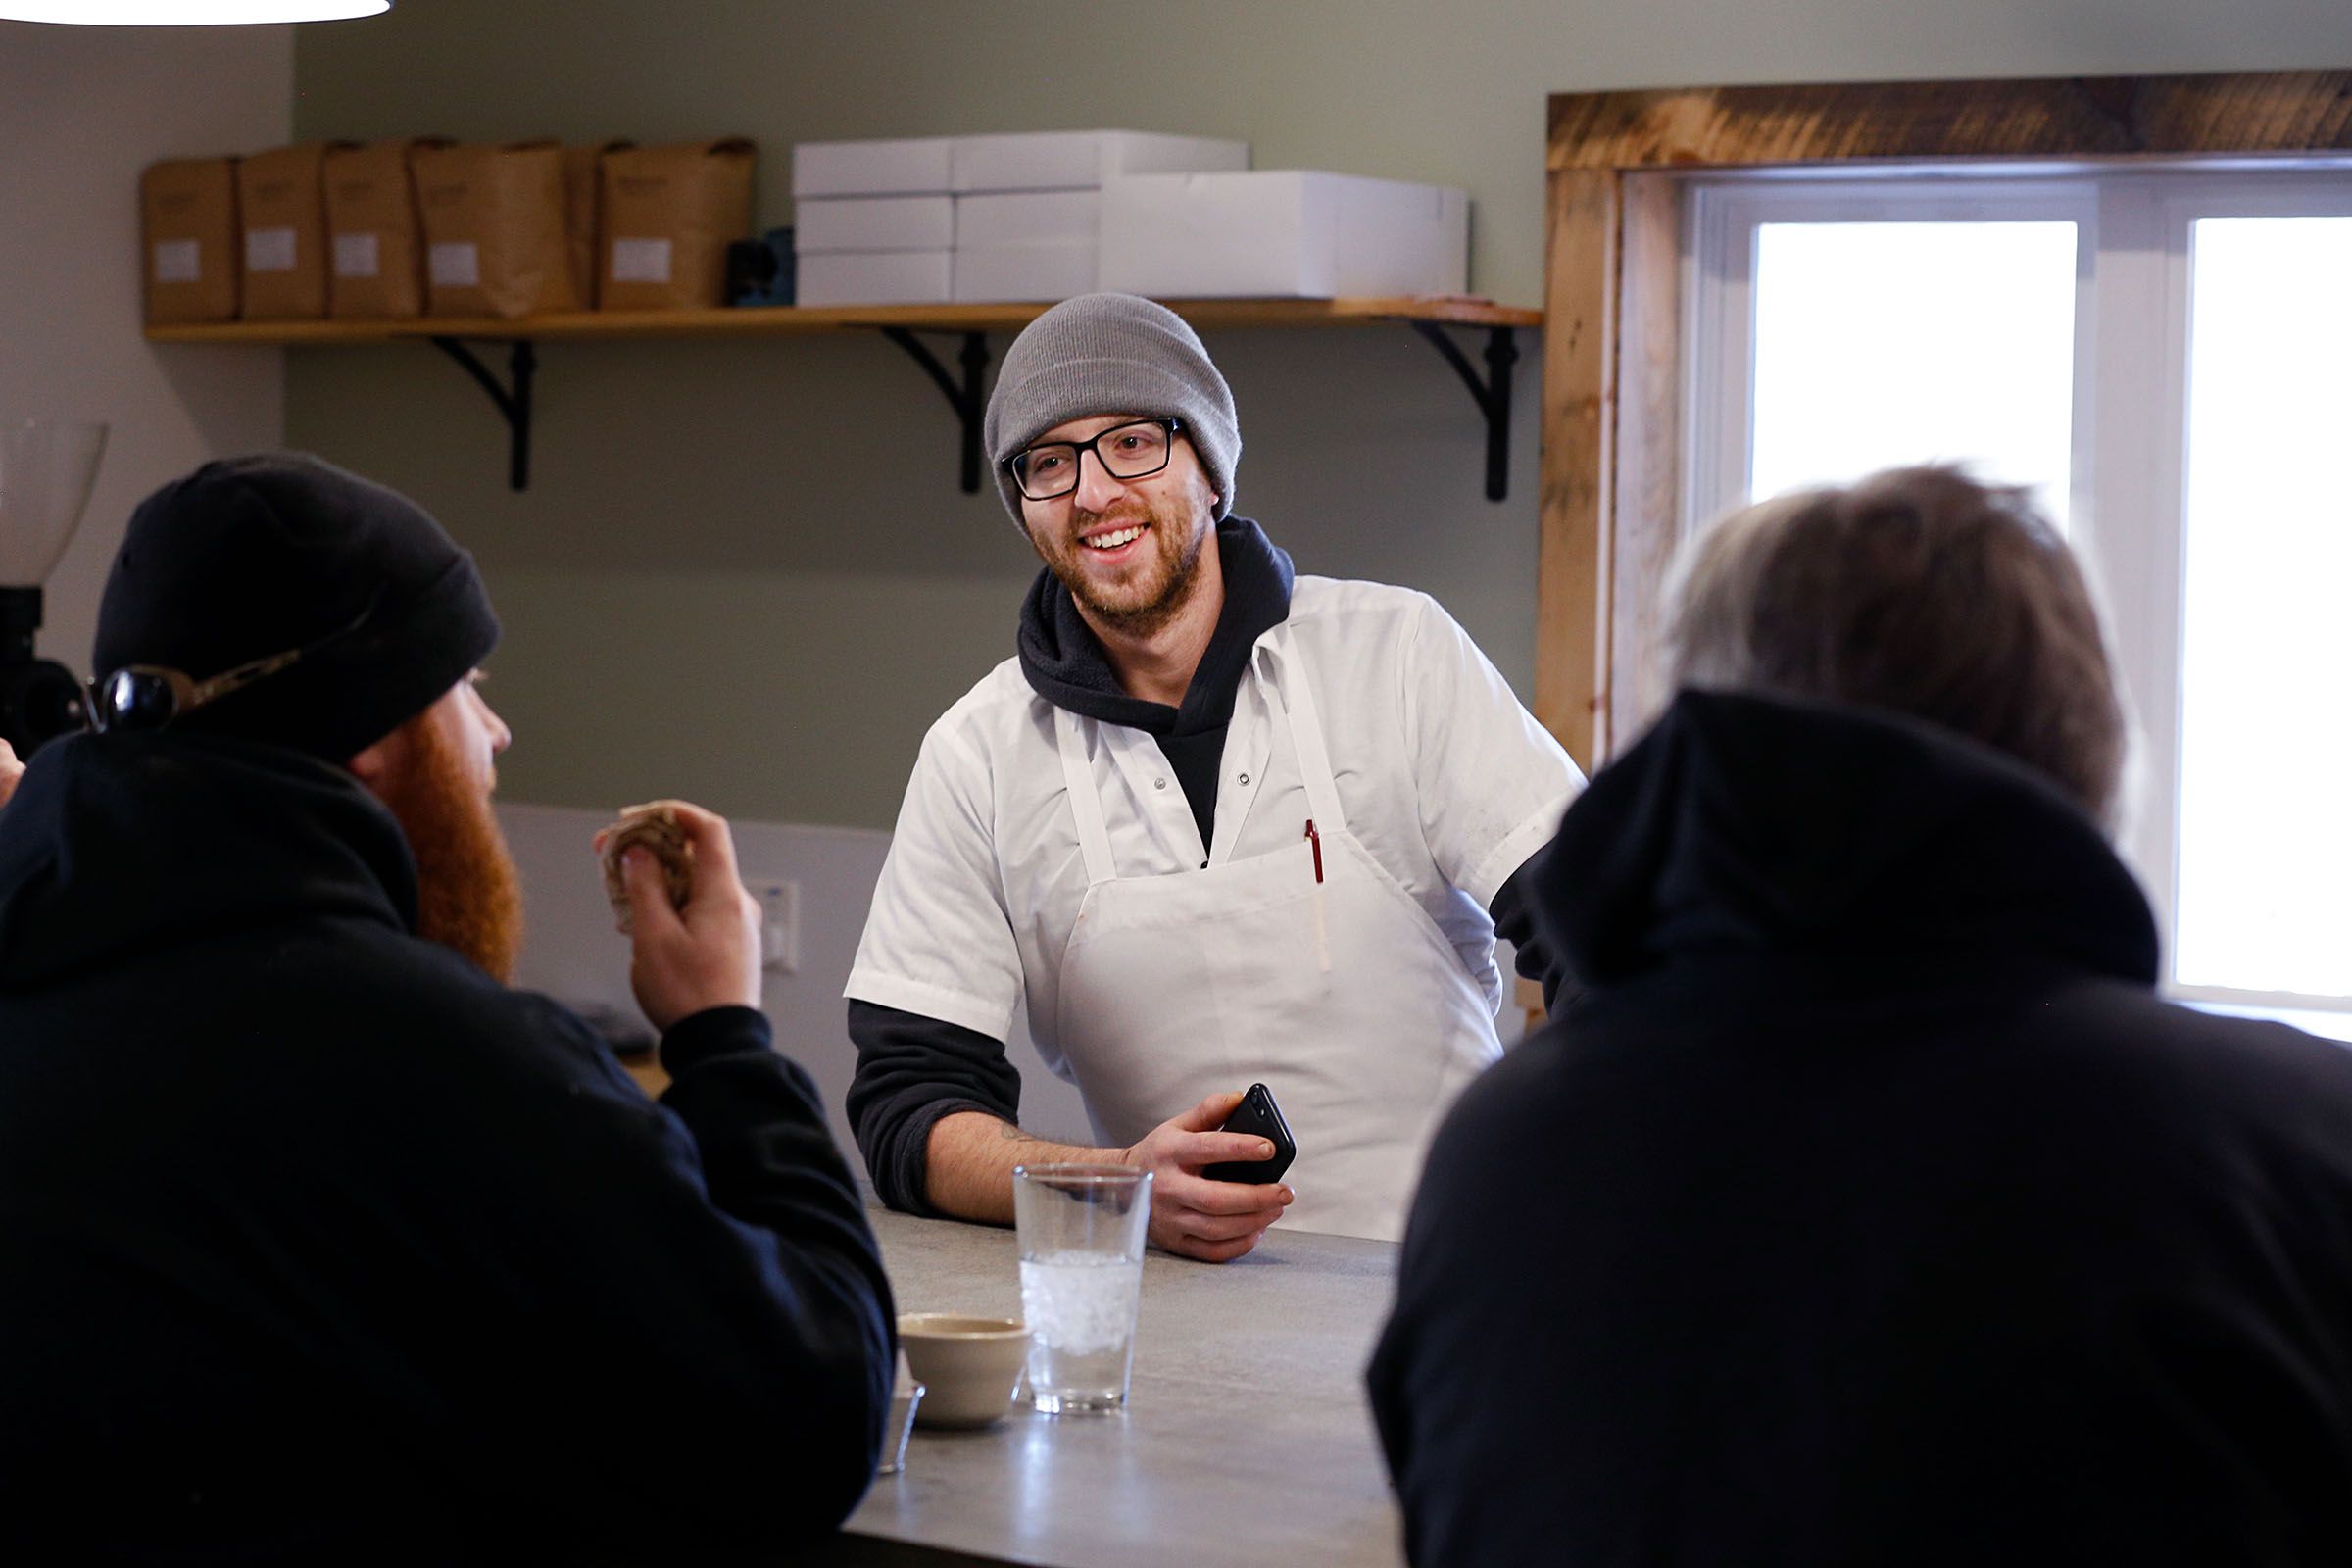 Co-owner Peter Varkonyi talks with Kristian Kurtzhalz, left, and Bob Cerra, both of Brownsville, while they eat lunch at the Brownsville Butcher & Pantry in Brownsville, Vt., on Jan. 17, 2019.  Kurtzhalz said that life without a store in town was a challenge. "This has been a huge convenience for the town," Cerra added. "It's what this town needs."  (Valley News - Joseph Ressler) Copyright Valley News. May not be reprinted or used online without permission. Send requests to permission@vnews.com.